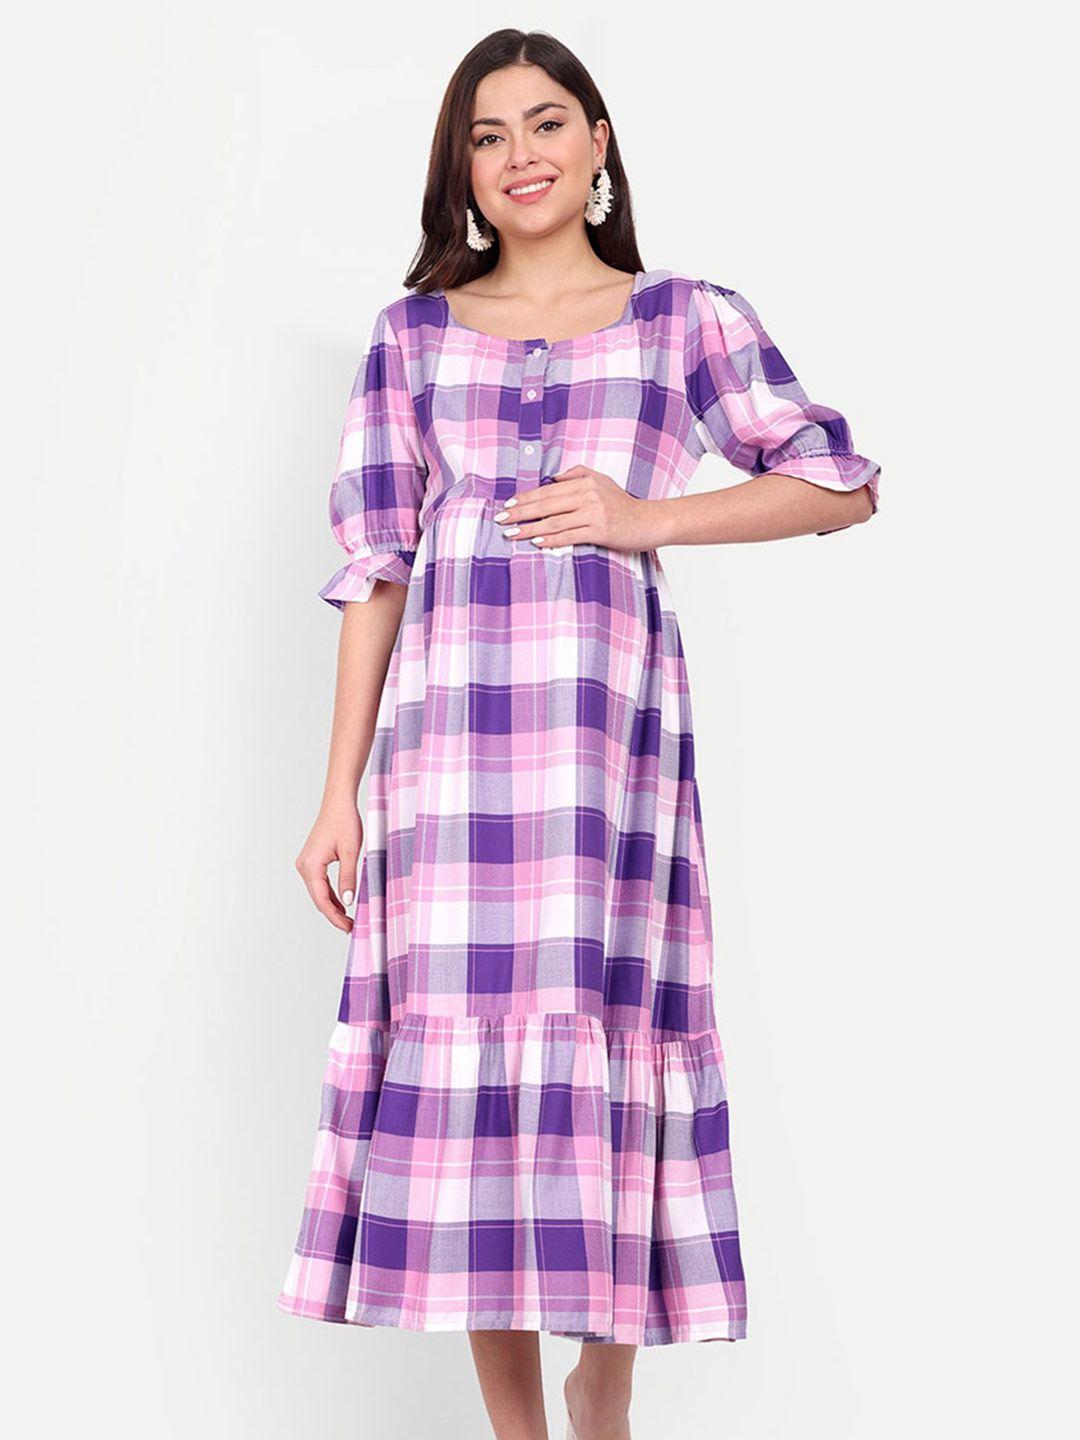 aaruvi-ruchi-verma-checked-maternity-fit-and-flare-dress